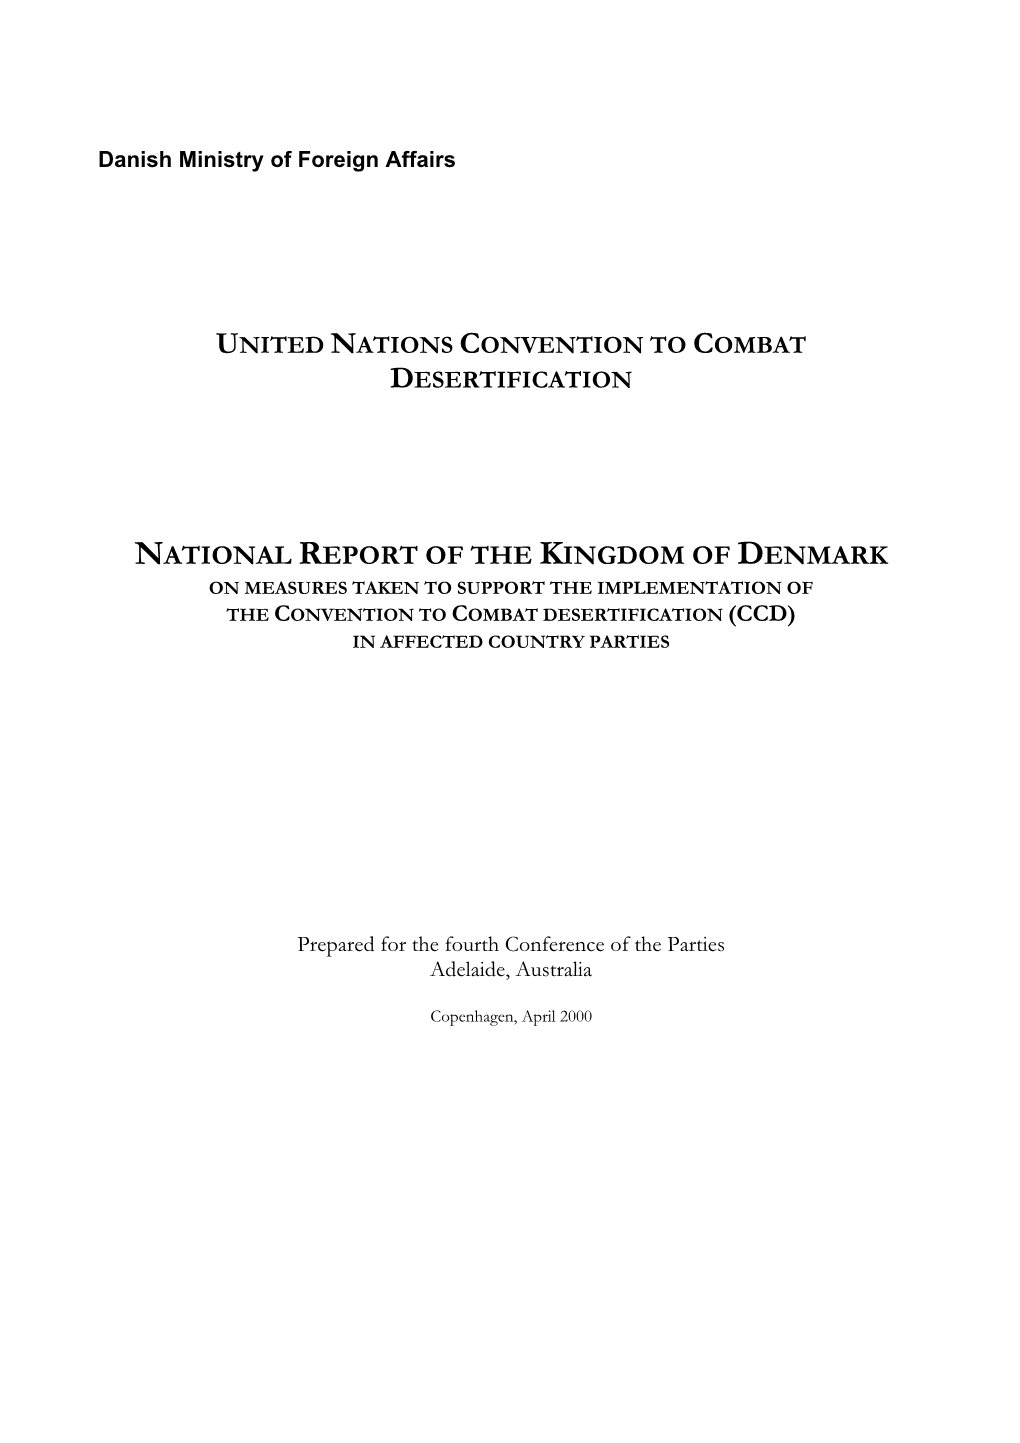 National Report of the Kingdom of Denmark